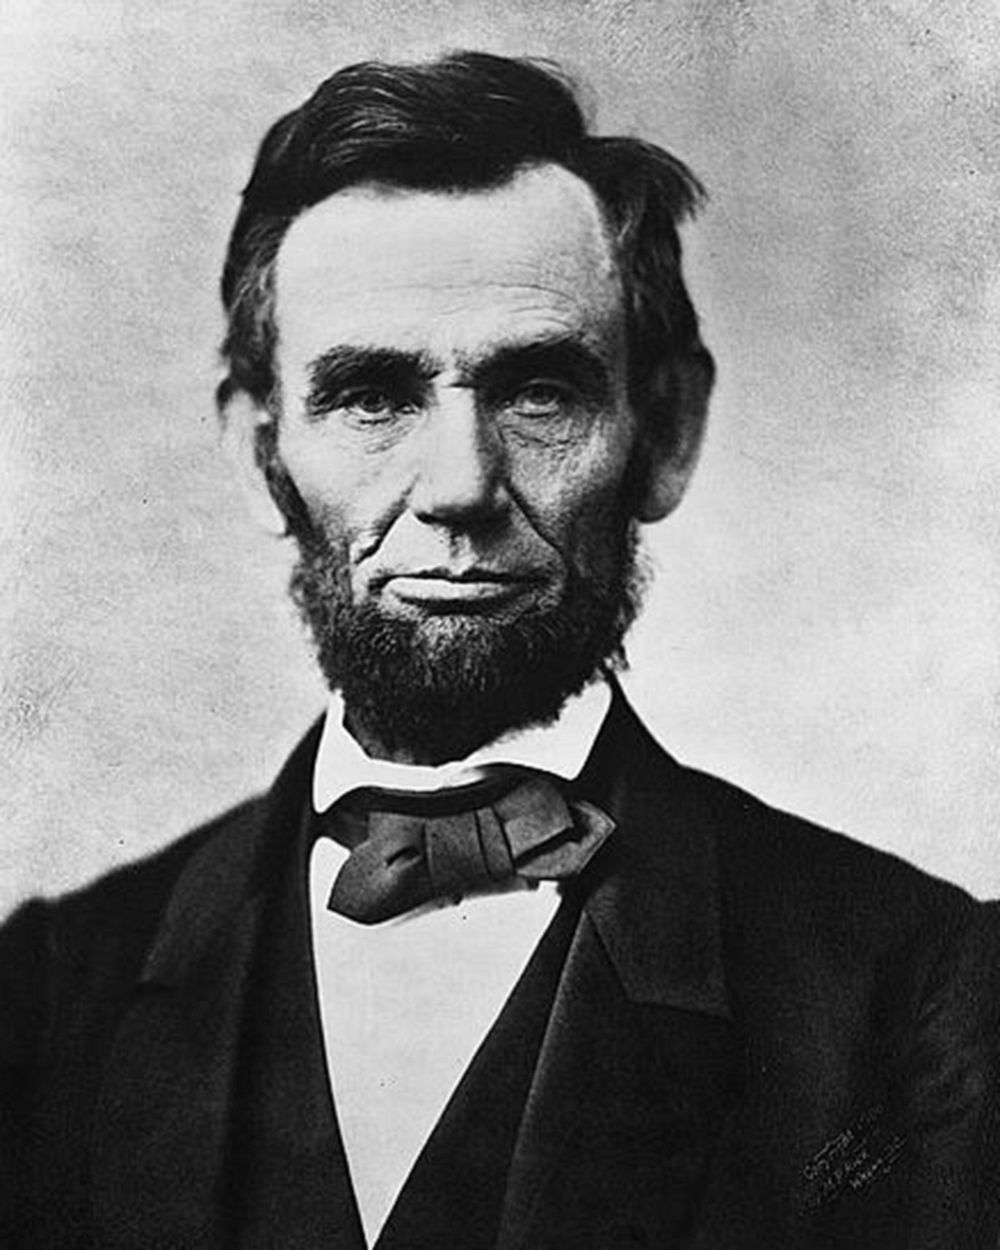 President Abraham Lincoln creator of the U.S. Department of Agriculture. Original public domain image from Flickr